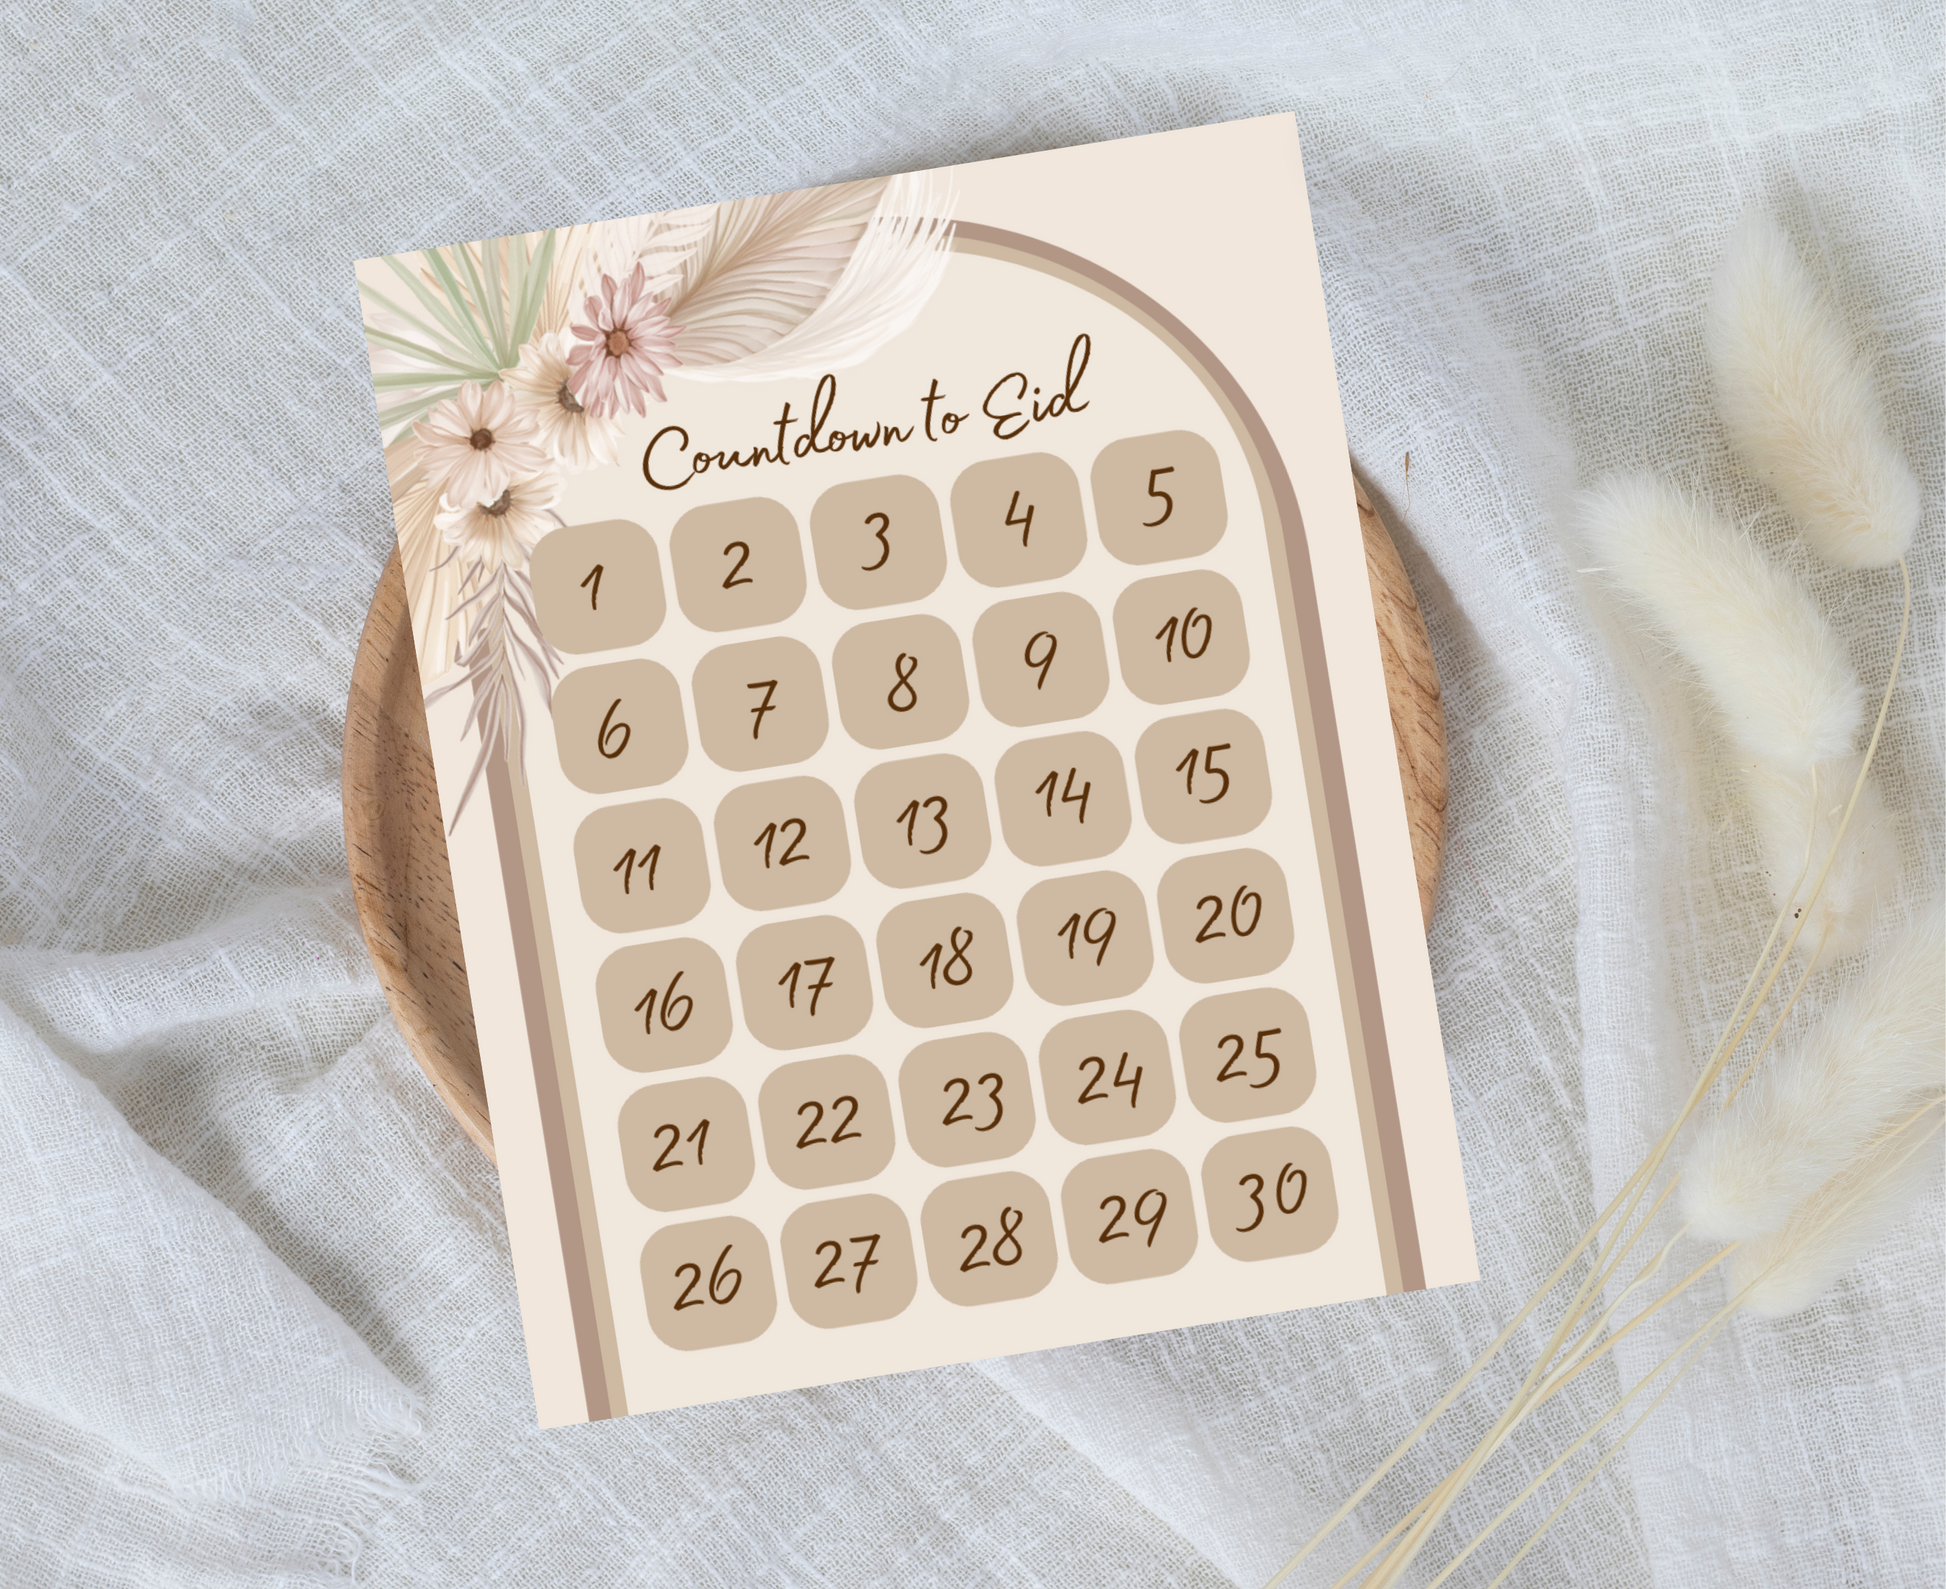 Countdown to Eid print on a neutral cloth background and round wooden tray. 